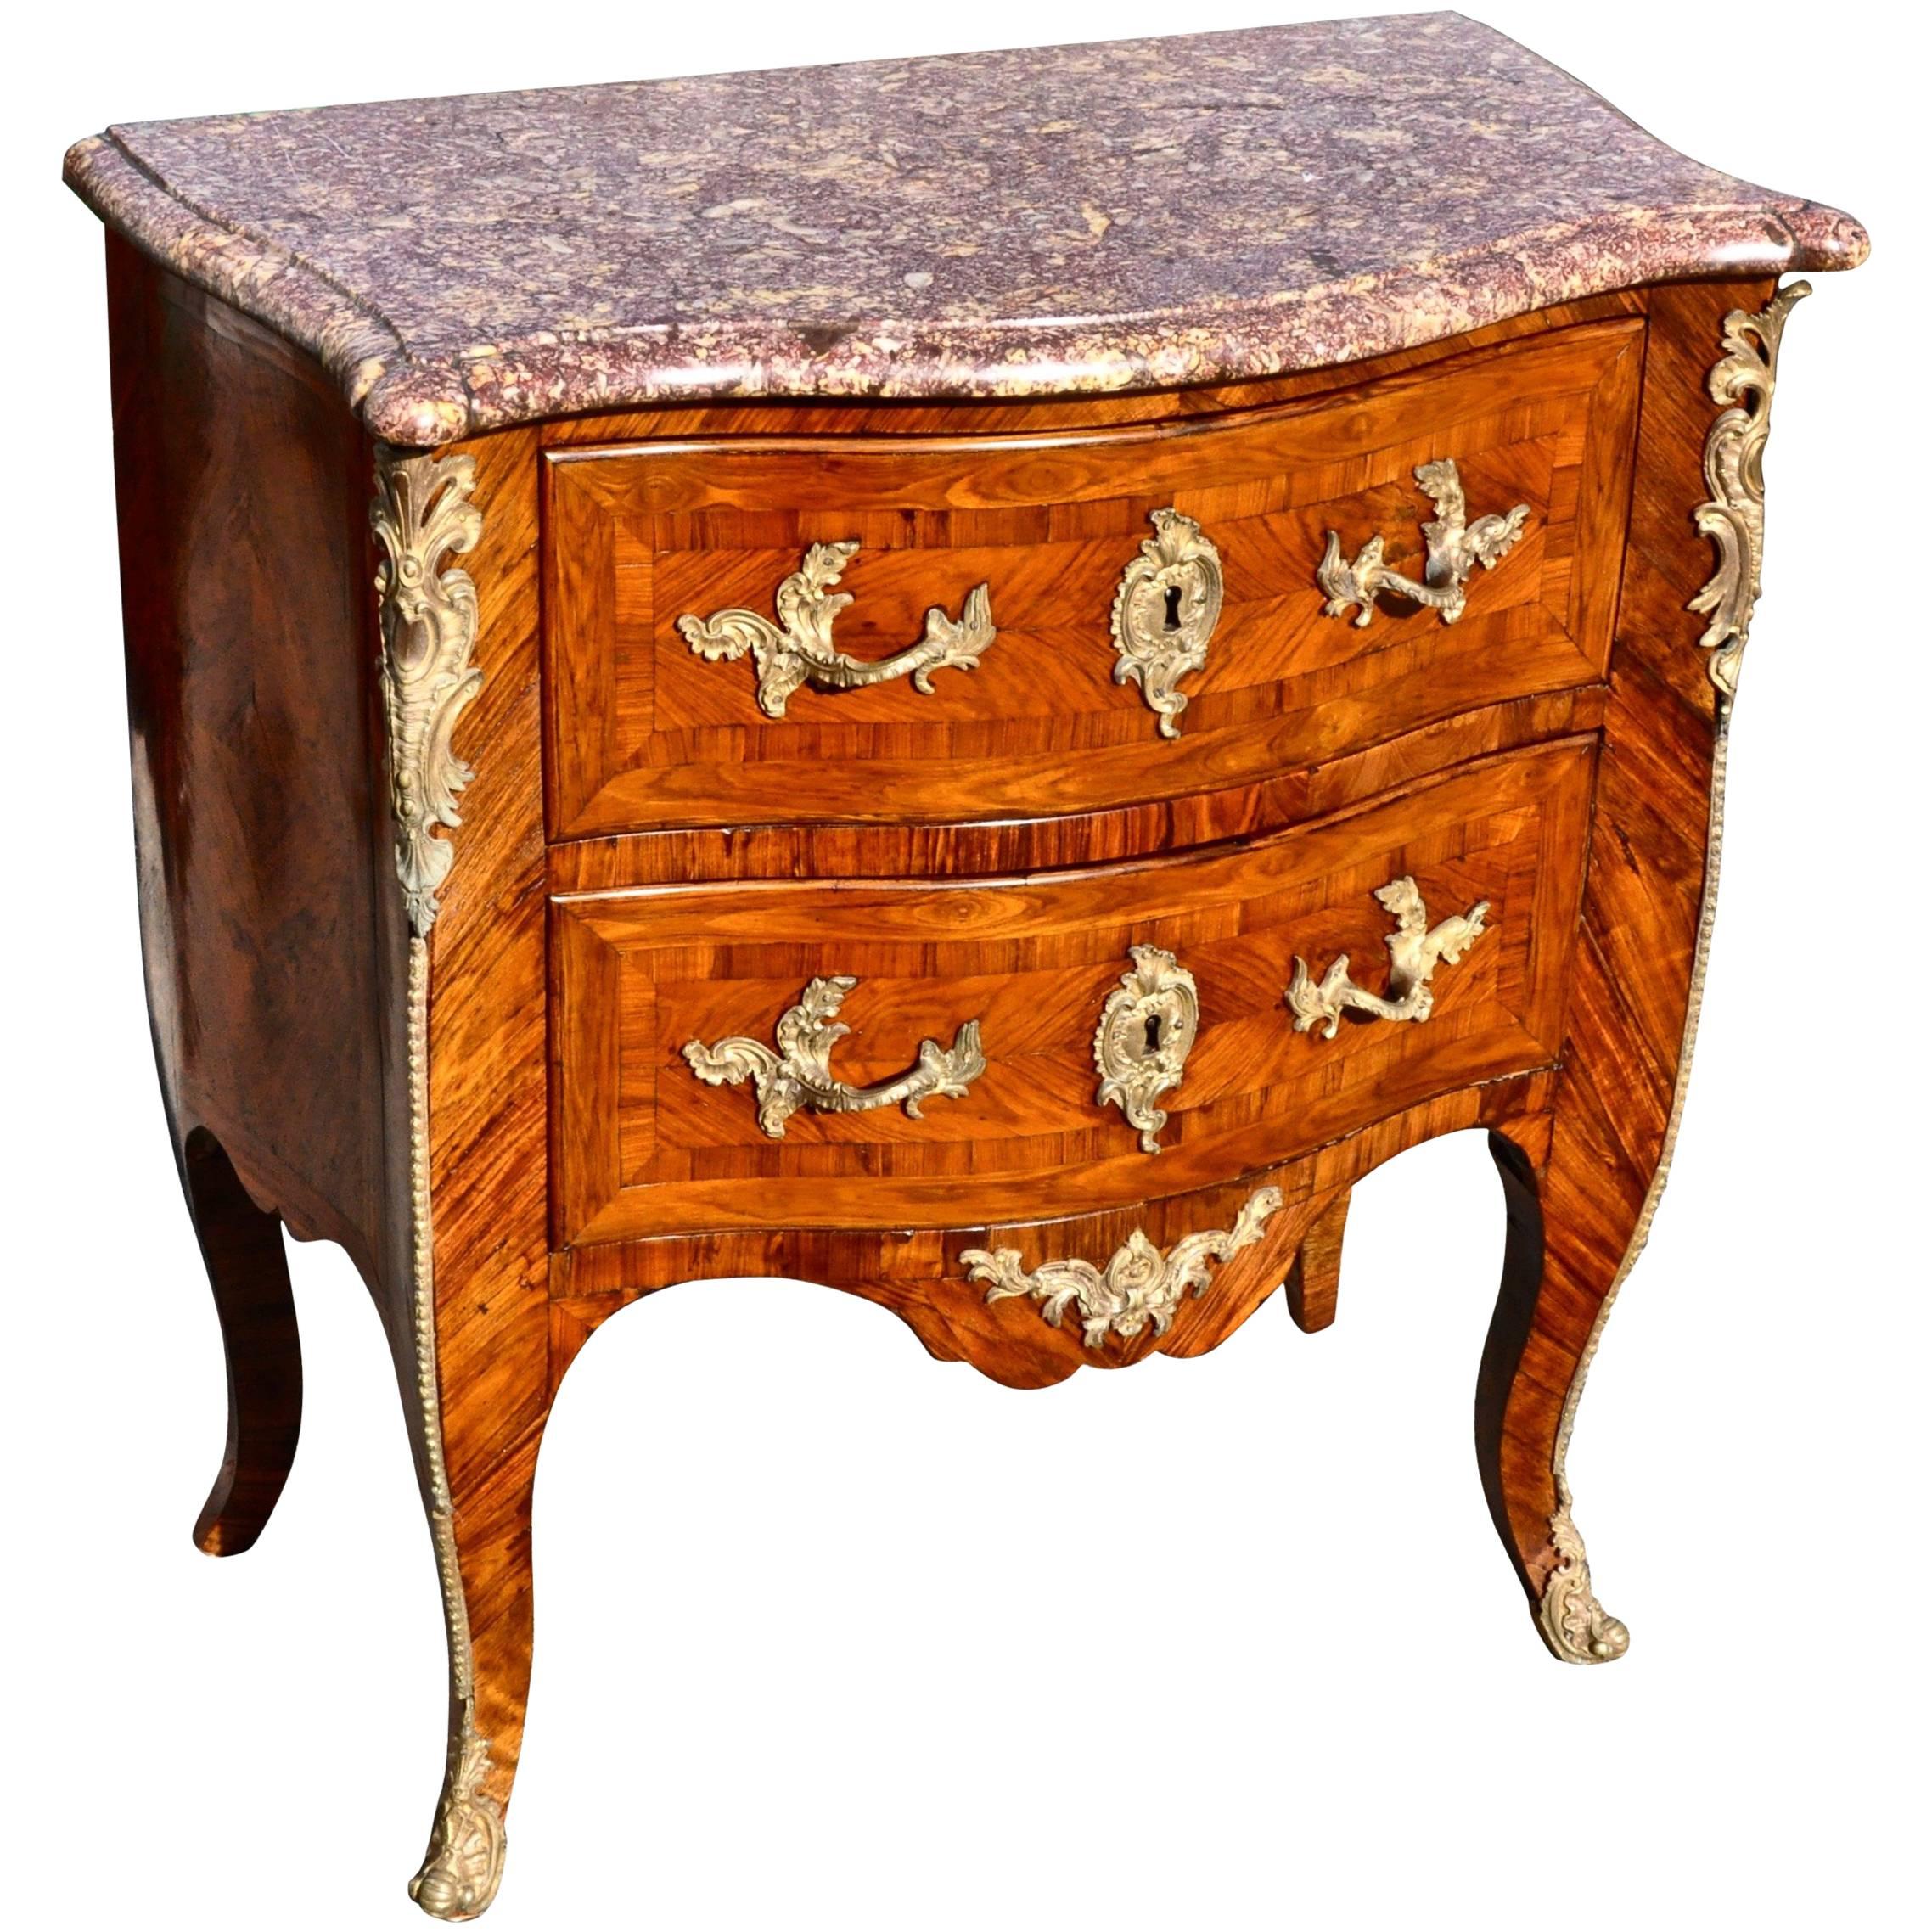 Period 18th Century Kingwood Marble-Top Louis XV Commode, Signed Saunier